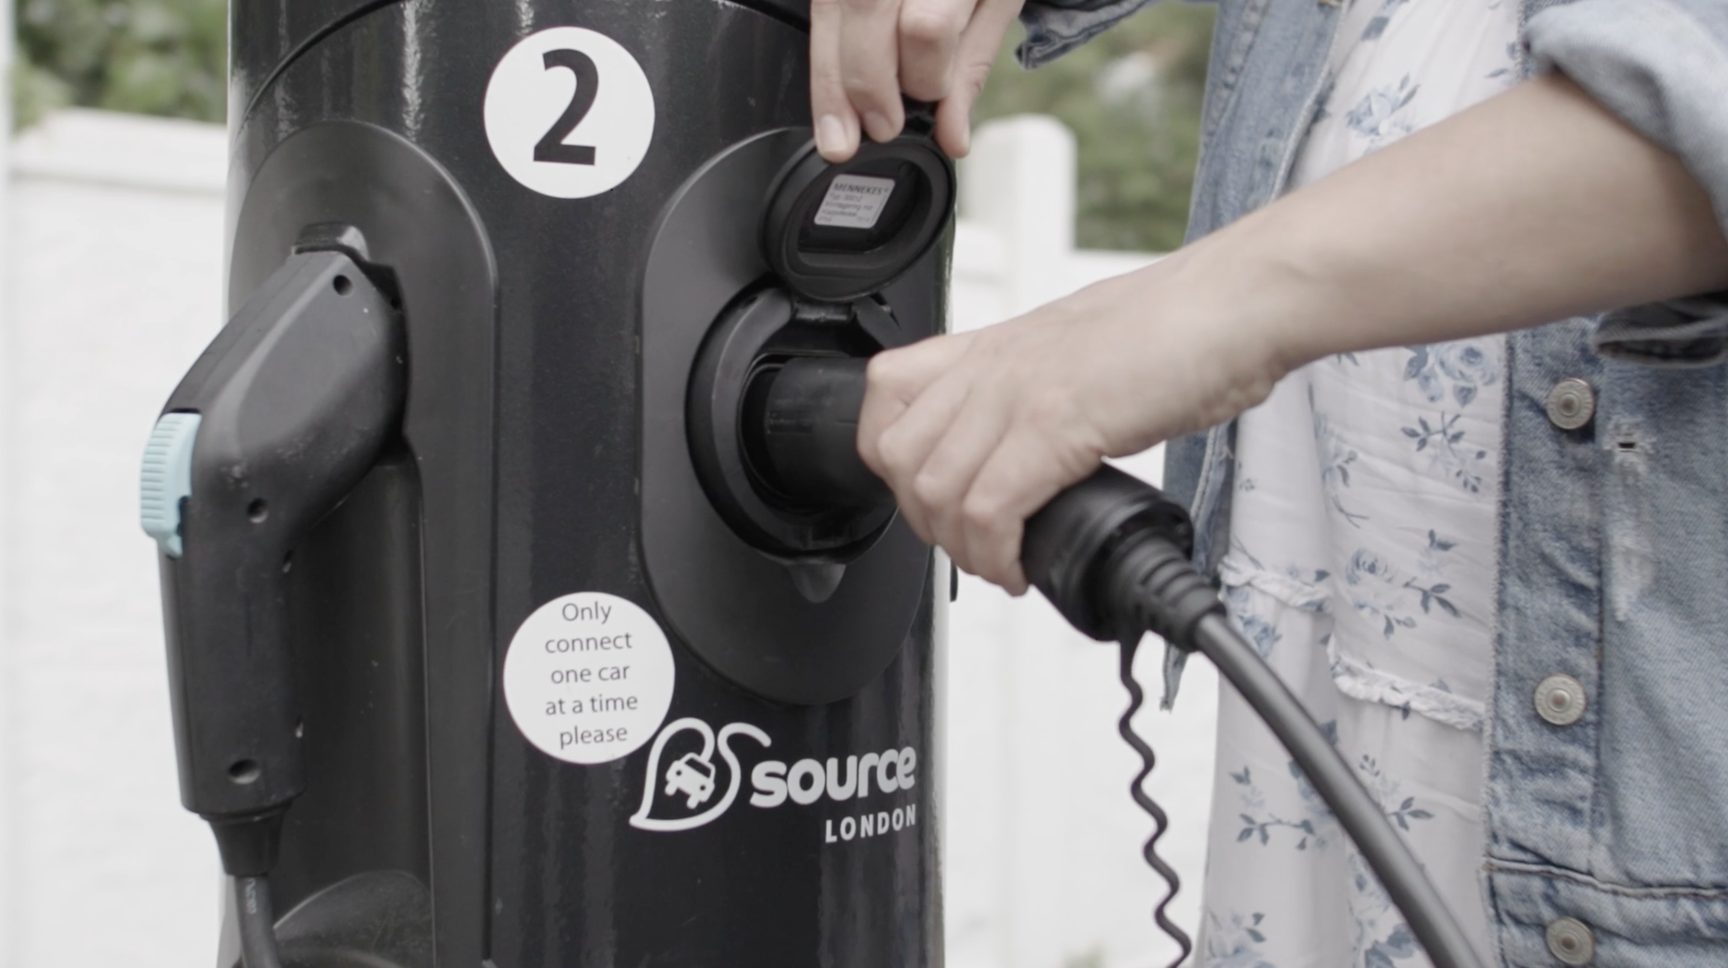 Image shows woman charging an EV using the Source London on street EV charging station